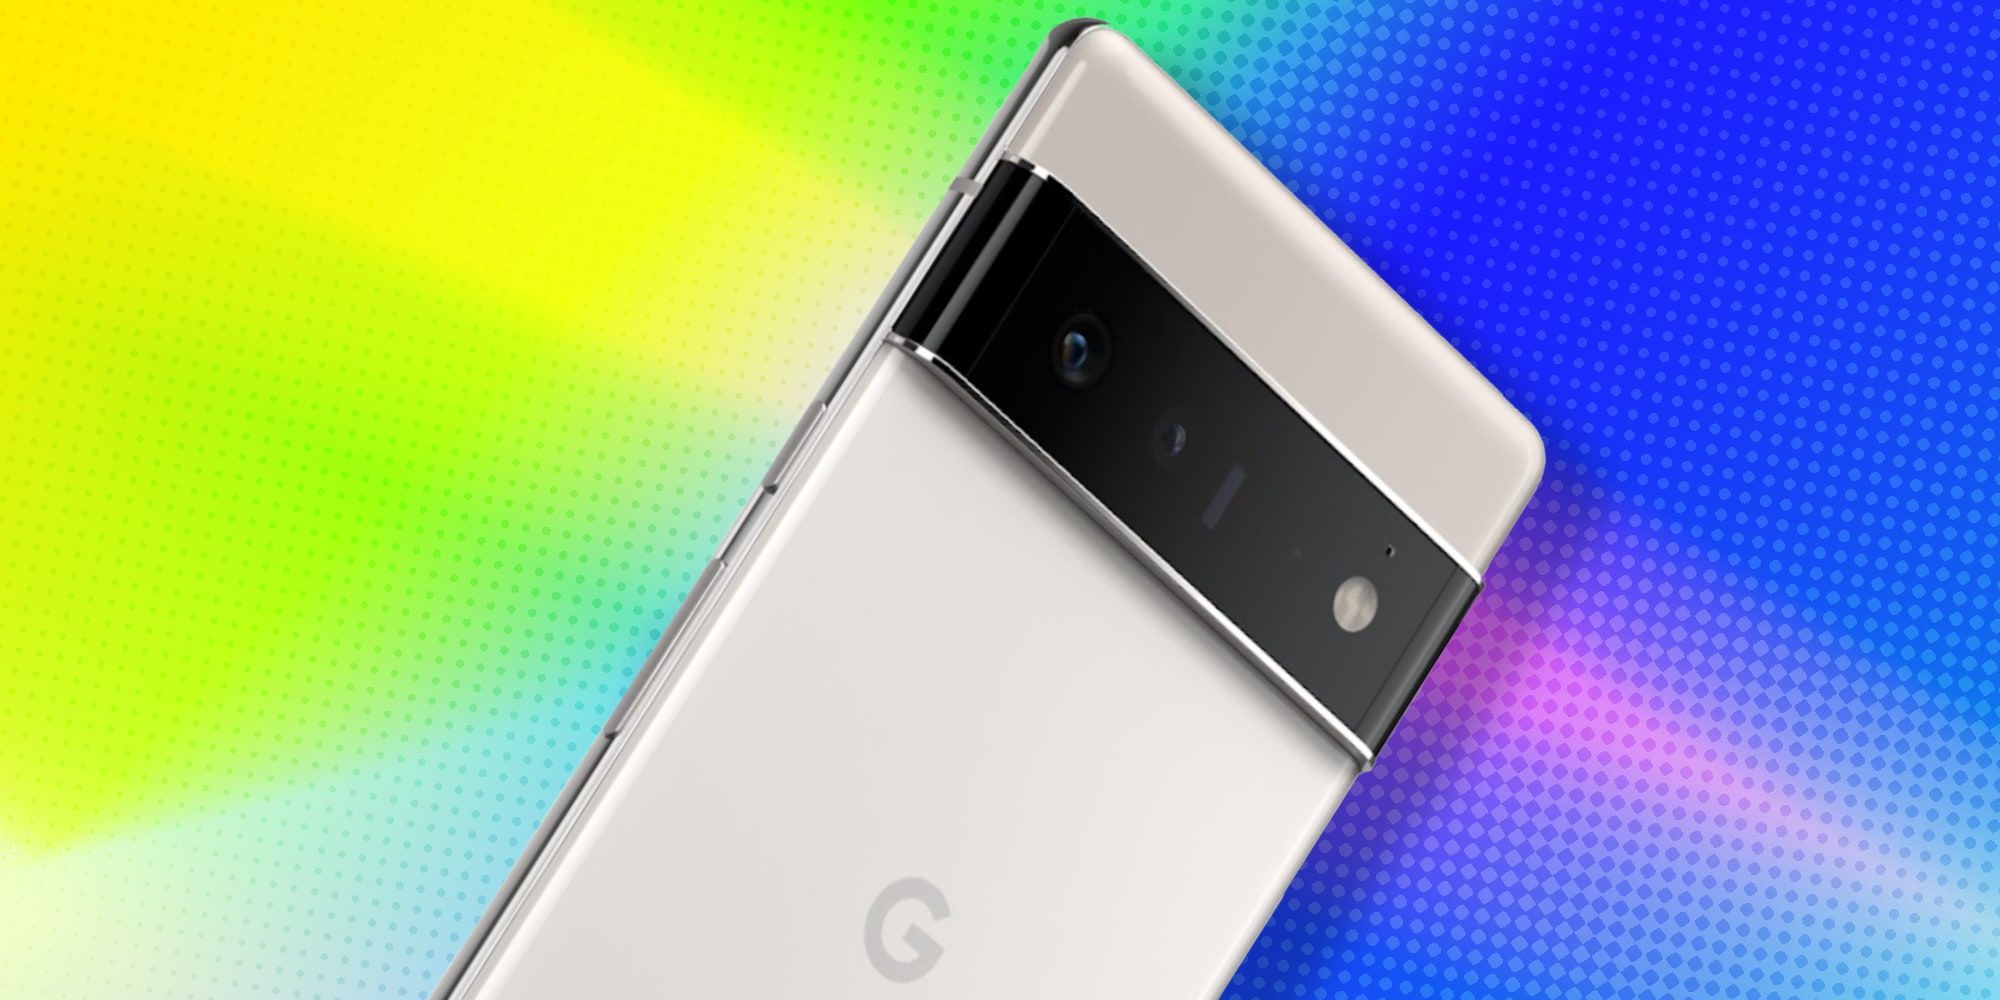 Googles Pixel 6 Pro Was Tested By Camera Experts & Hits US Top 3